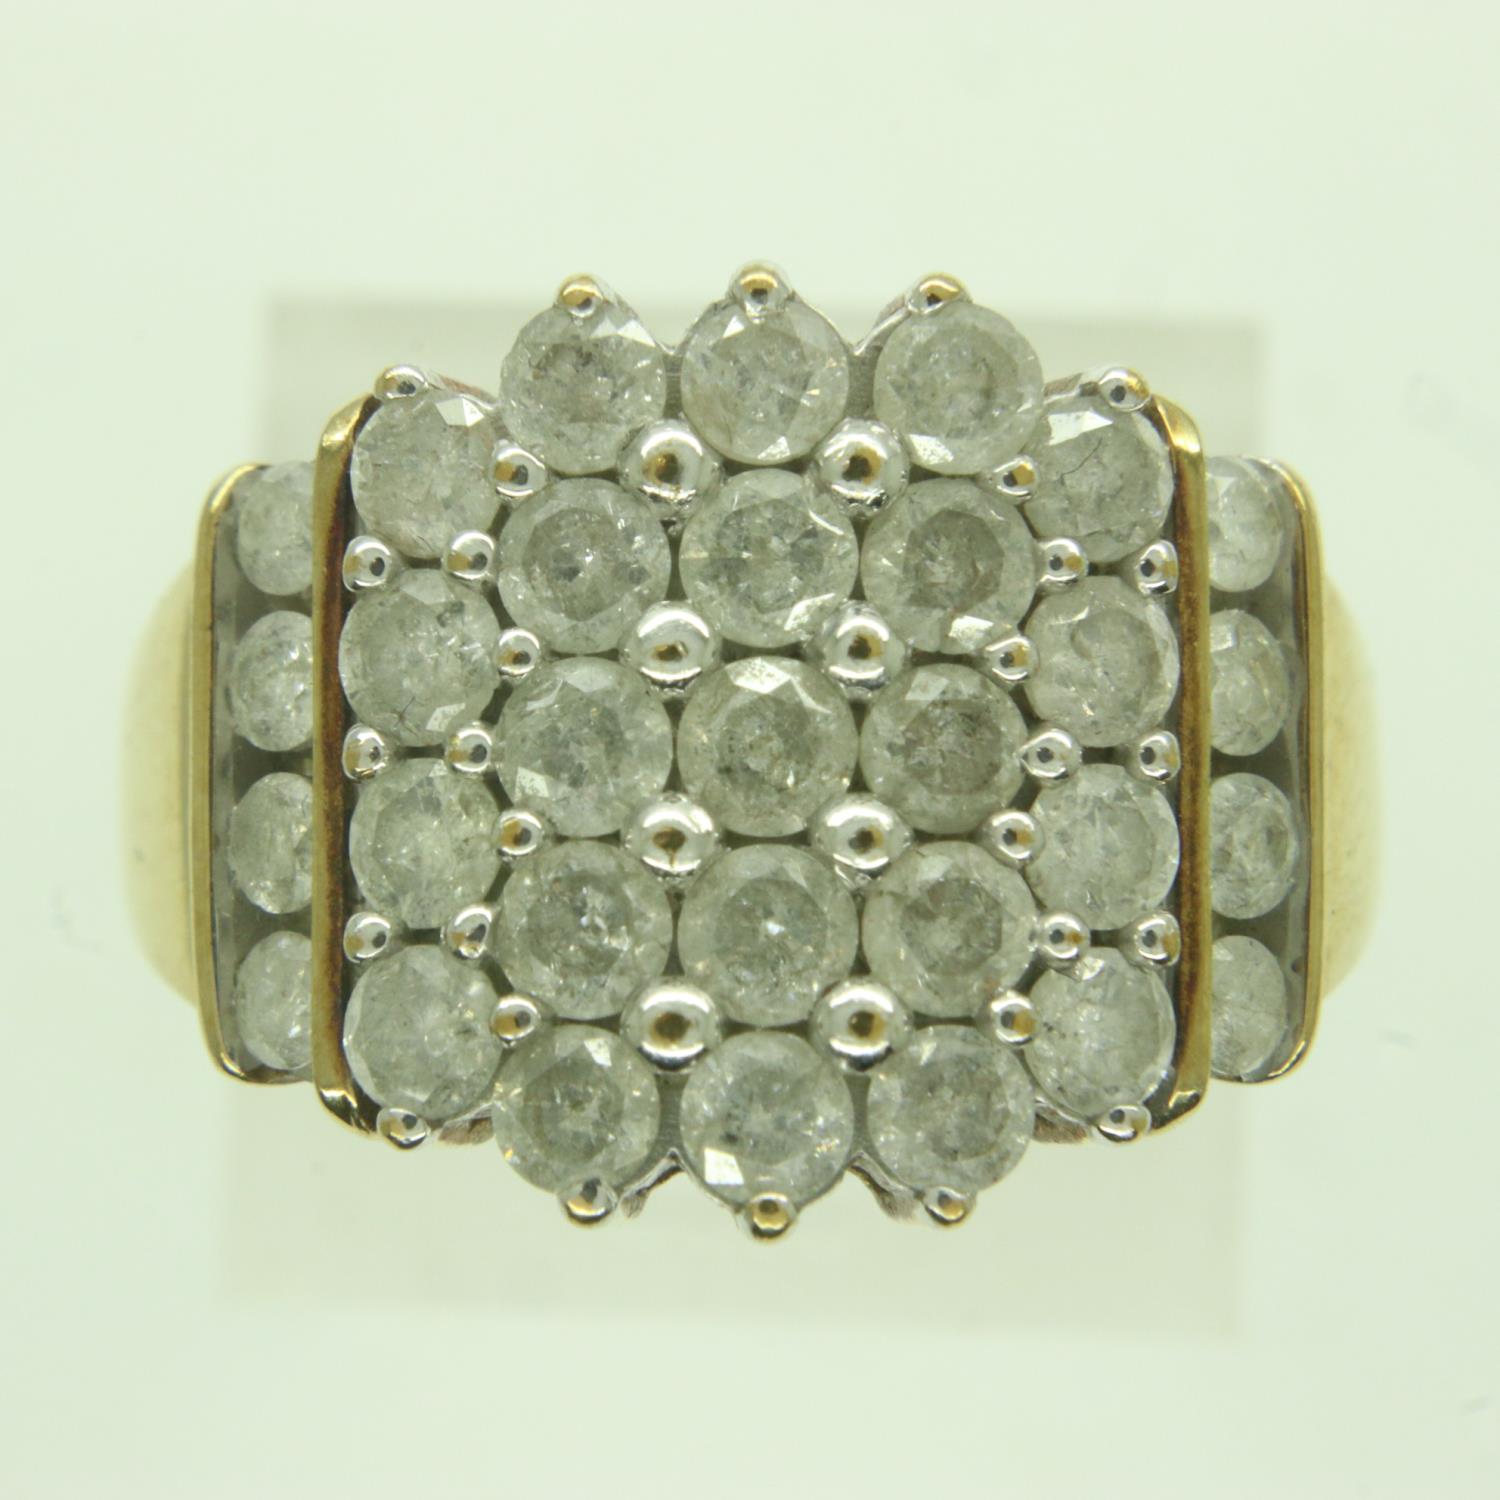 9ct gold cluster ring set with 1.5ct diamonds, size P, 5.7g. UK P&P Group 0 (£6+VAT for the first